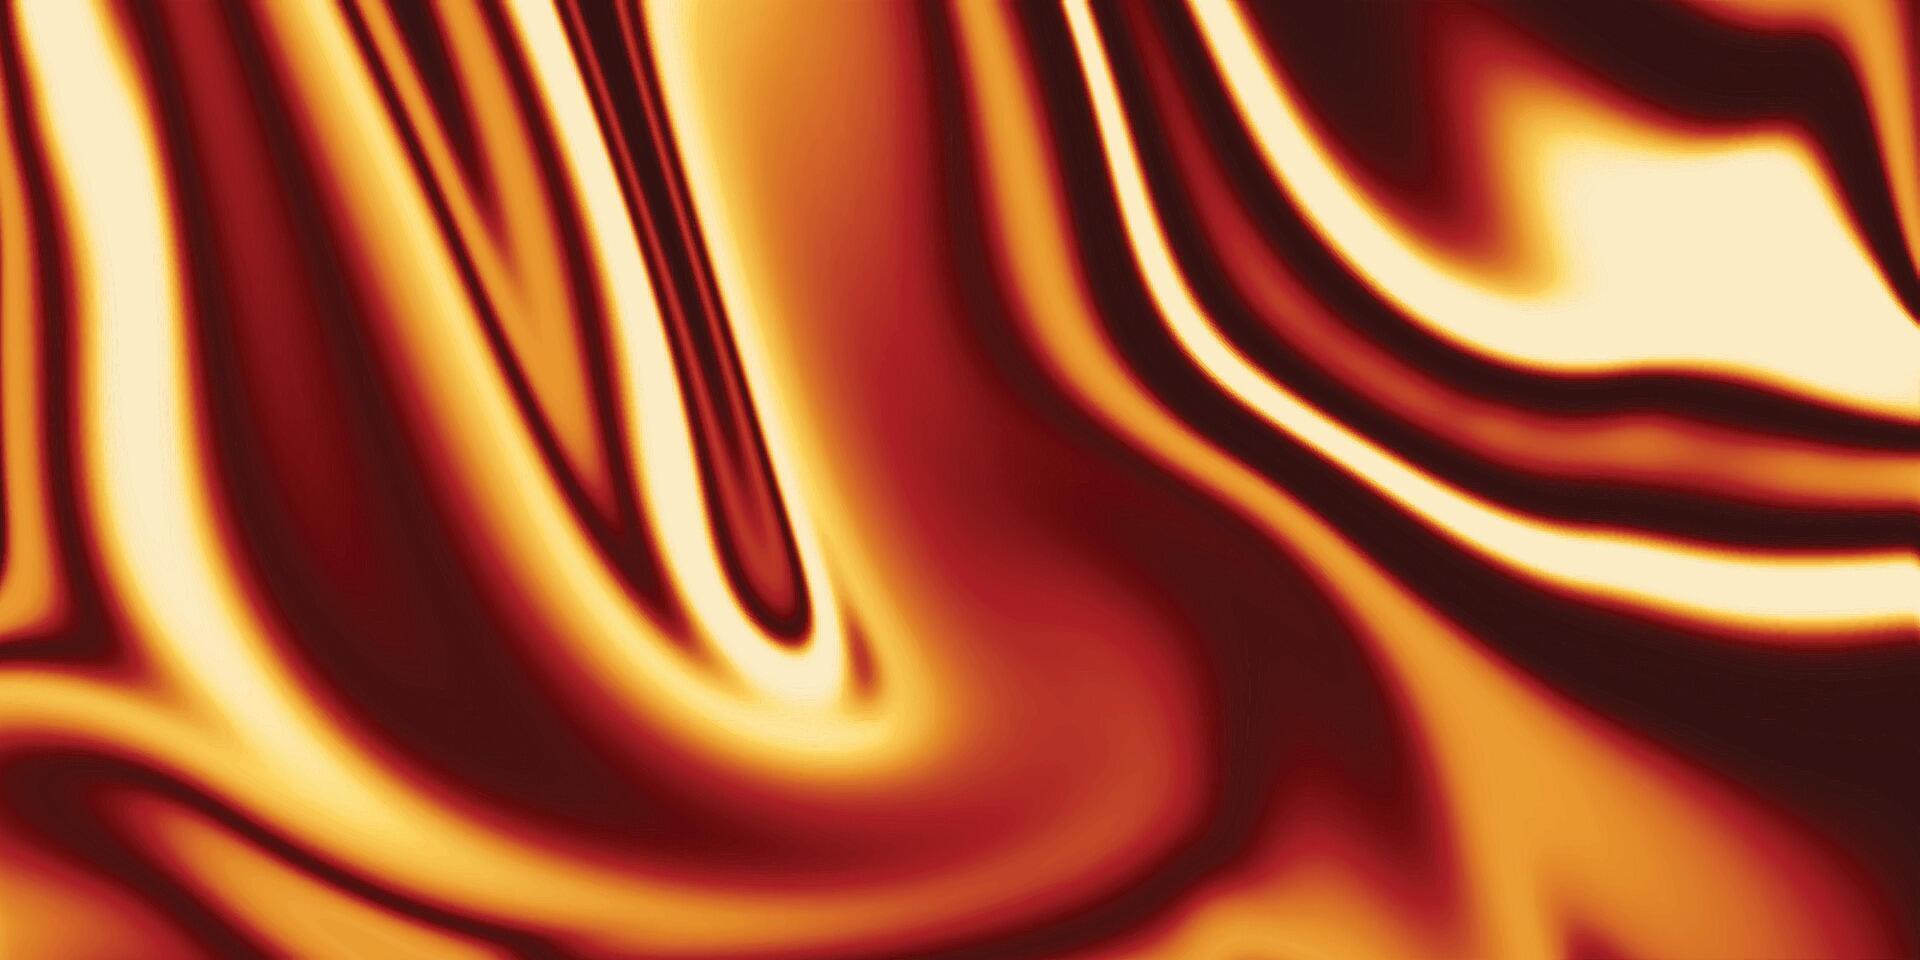 Colorful liquify background. Abstract liquid waves background. Red and orange flowing background. Neon background with lines. vector